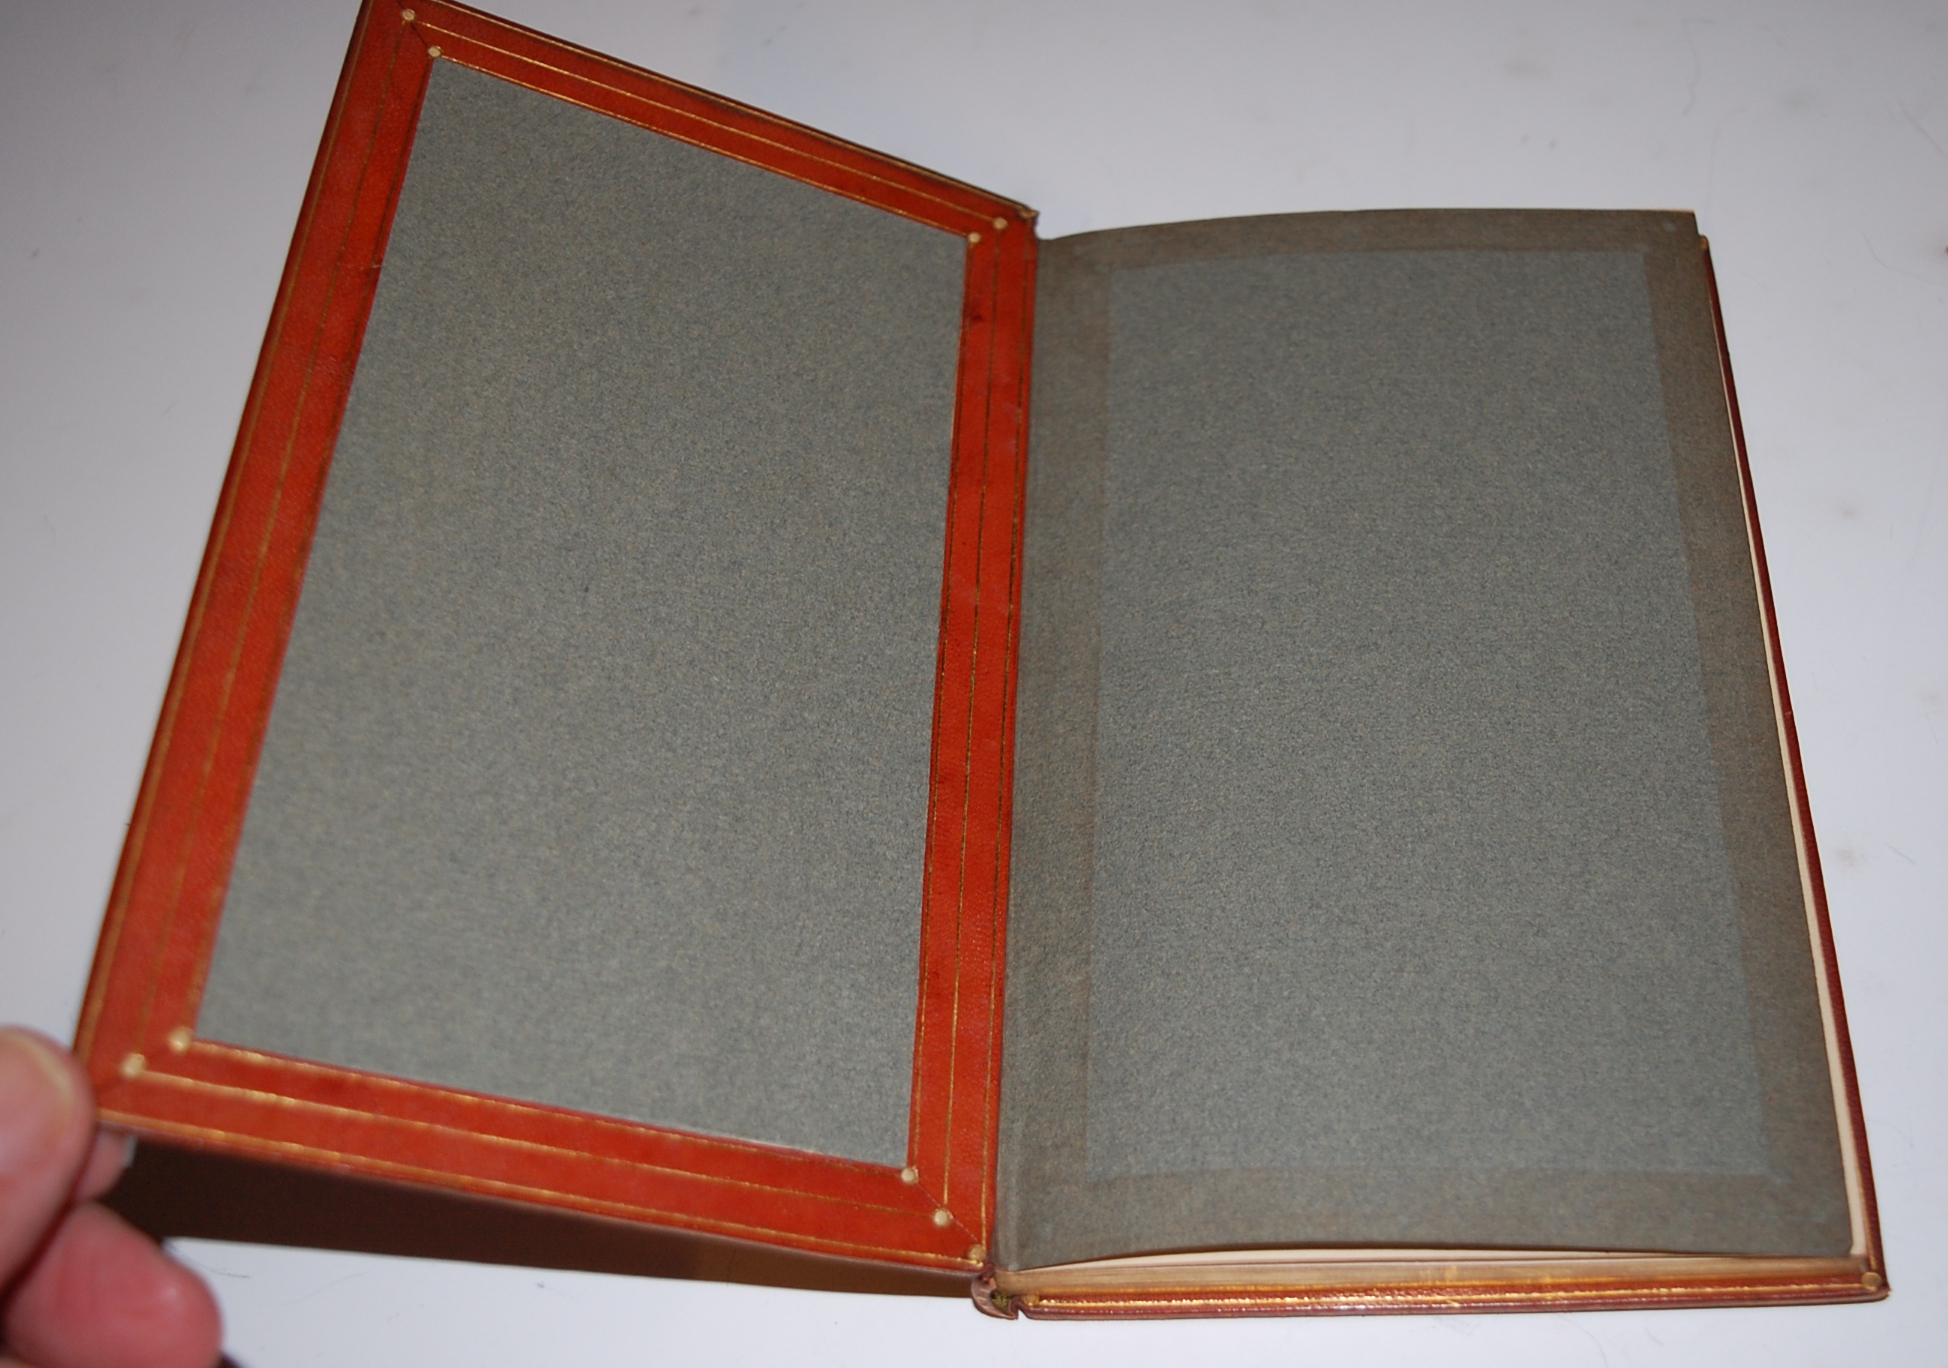 PHILLIPS Stephen, Paolo & Francesca, London 1900, 8vo, rare binding by Miss M Marshall and Edith J. - Image 2 of 3